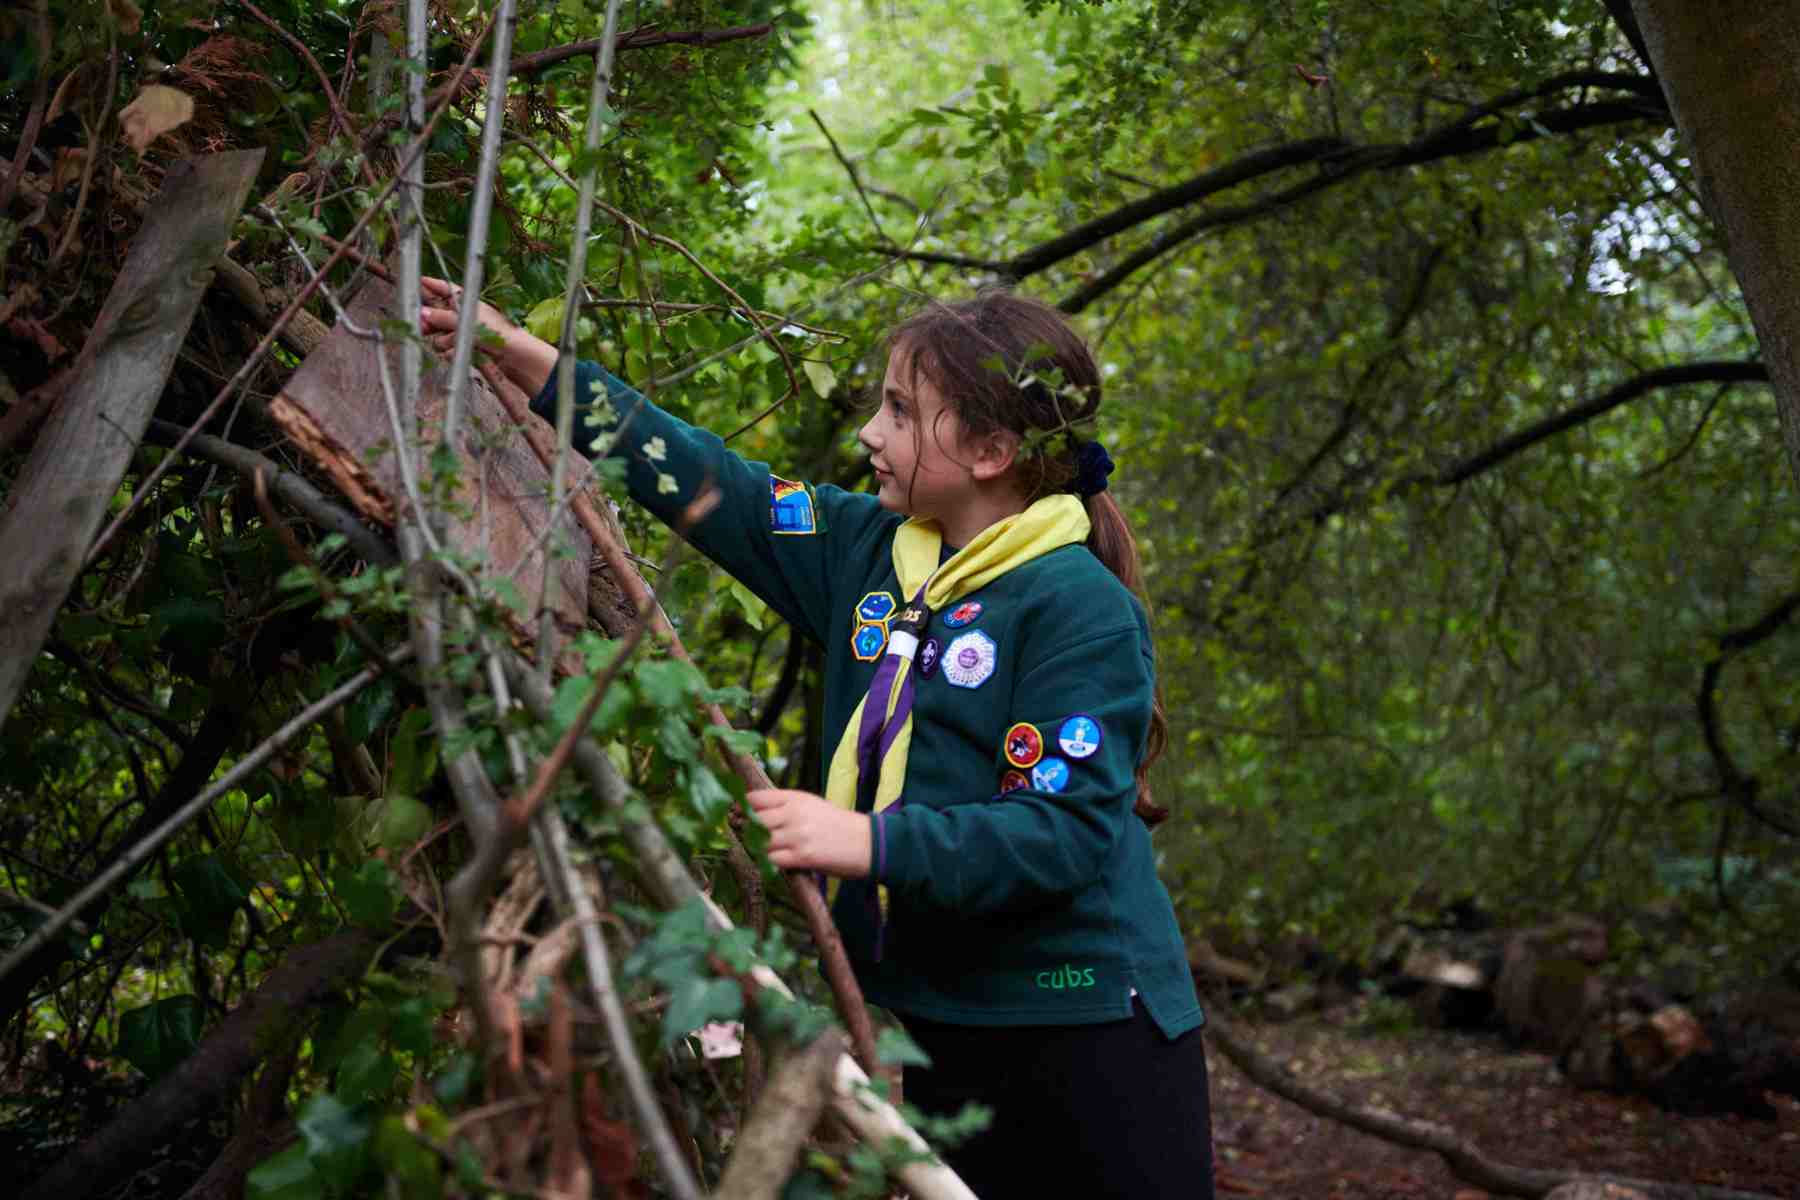 A girl is building a Den in a wooded area, reaching out and holding sticks. She's a cub with a yellow necker on.